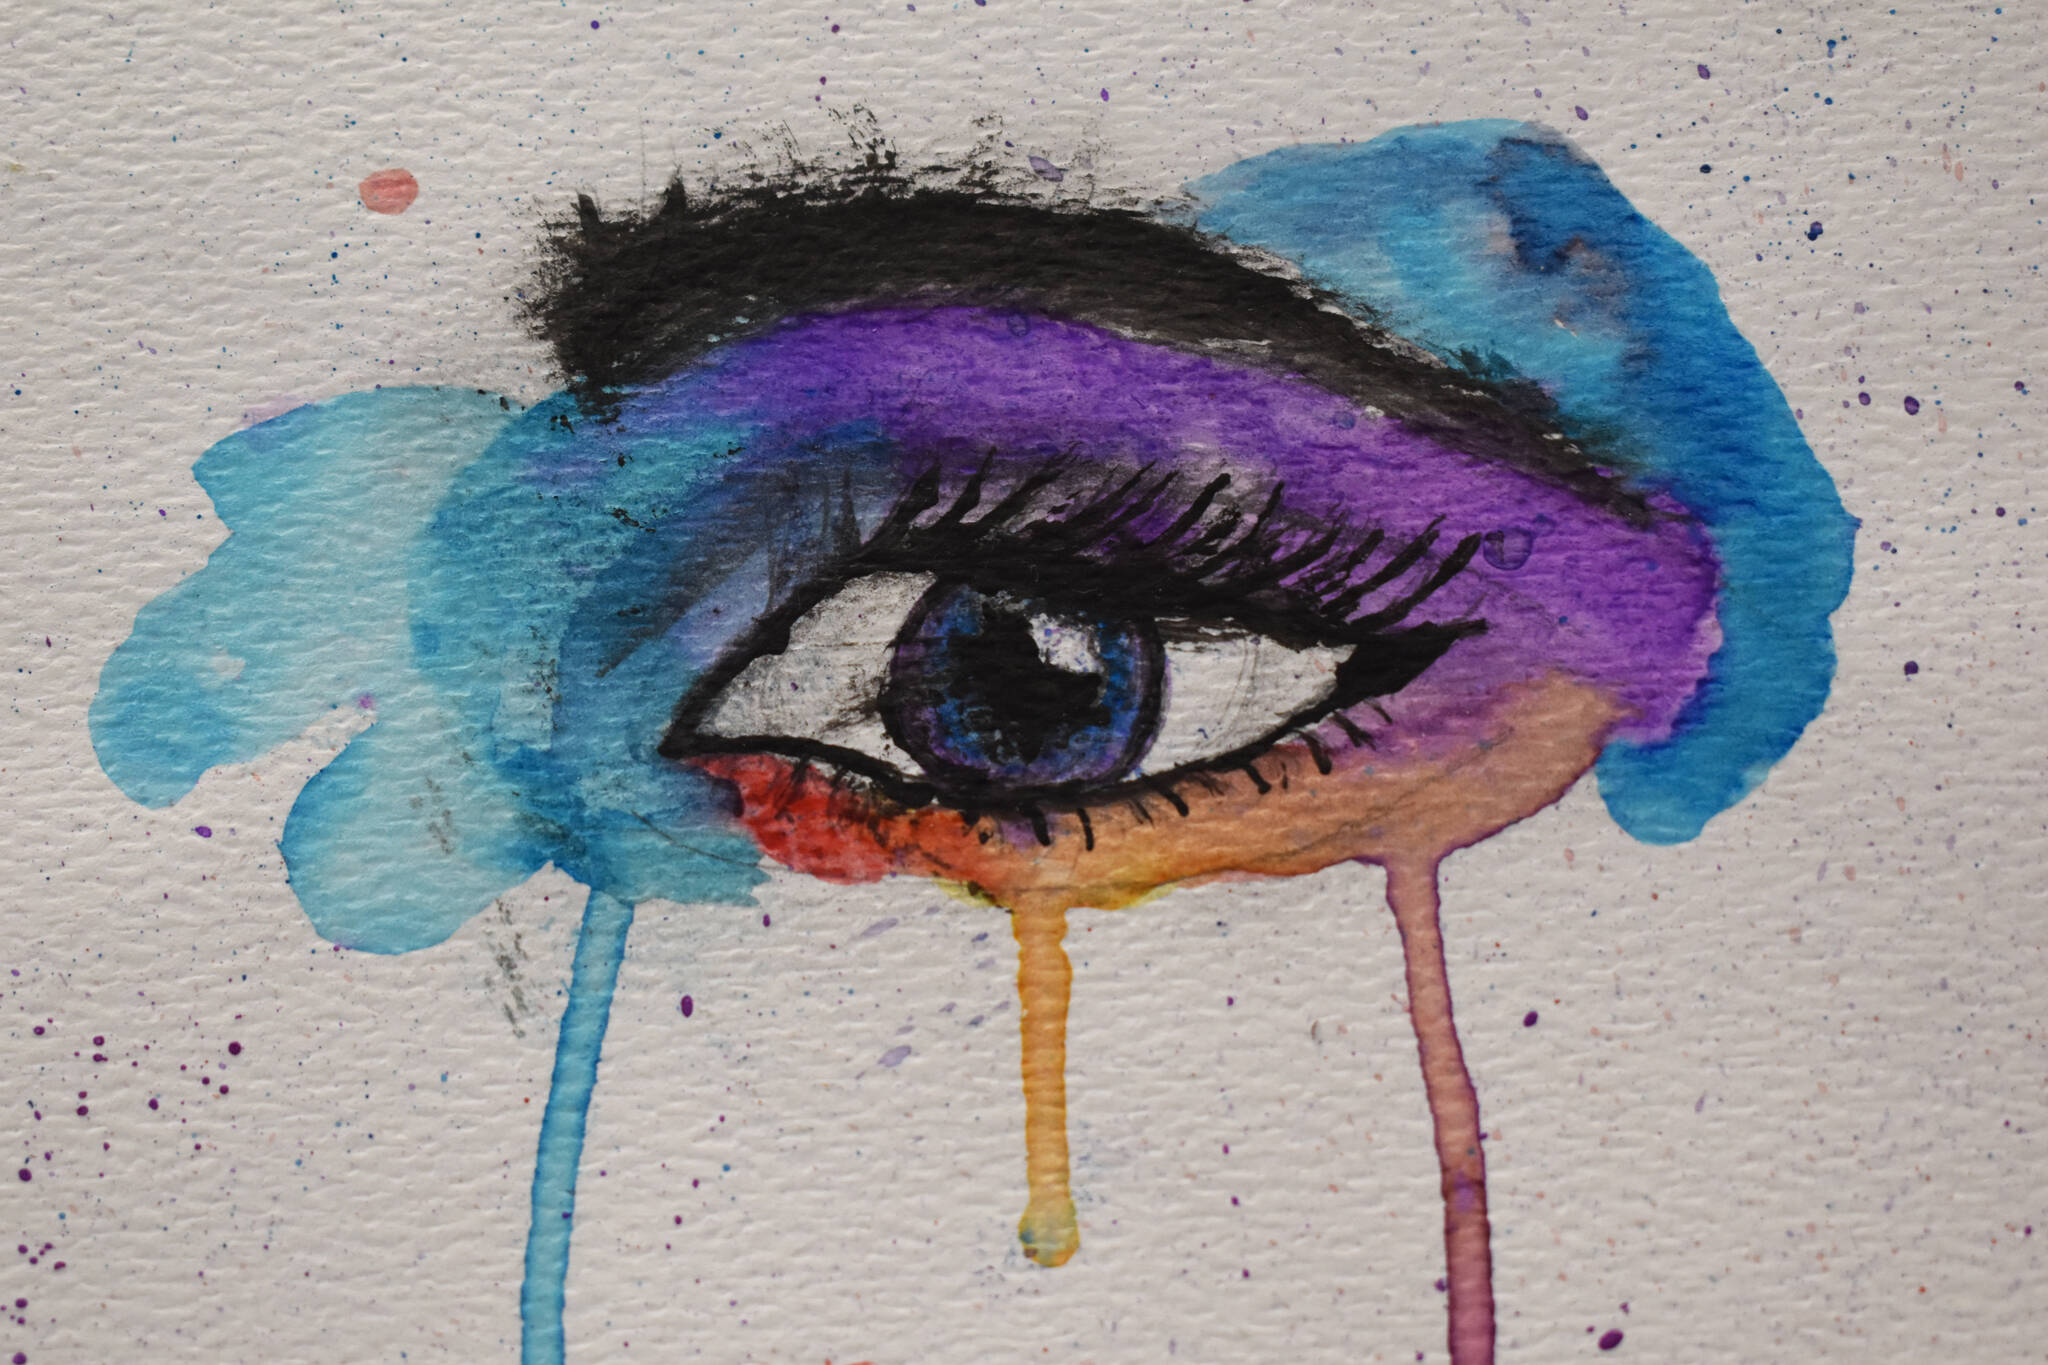 A colorful painting of an eye hangs at the Kenai Art Center in Kenai, Alaska on Wednesday, April 5, 2023, in preparation for the debut of the 32nd Annual Kenai Peninsula Borough School District Visual Feast. (Jake Dye/Peninsula Clarion)